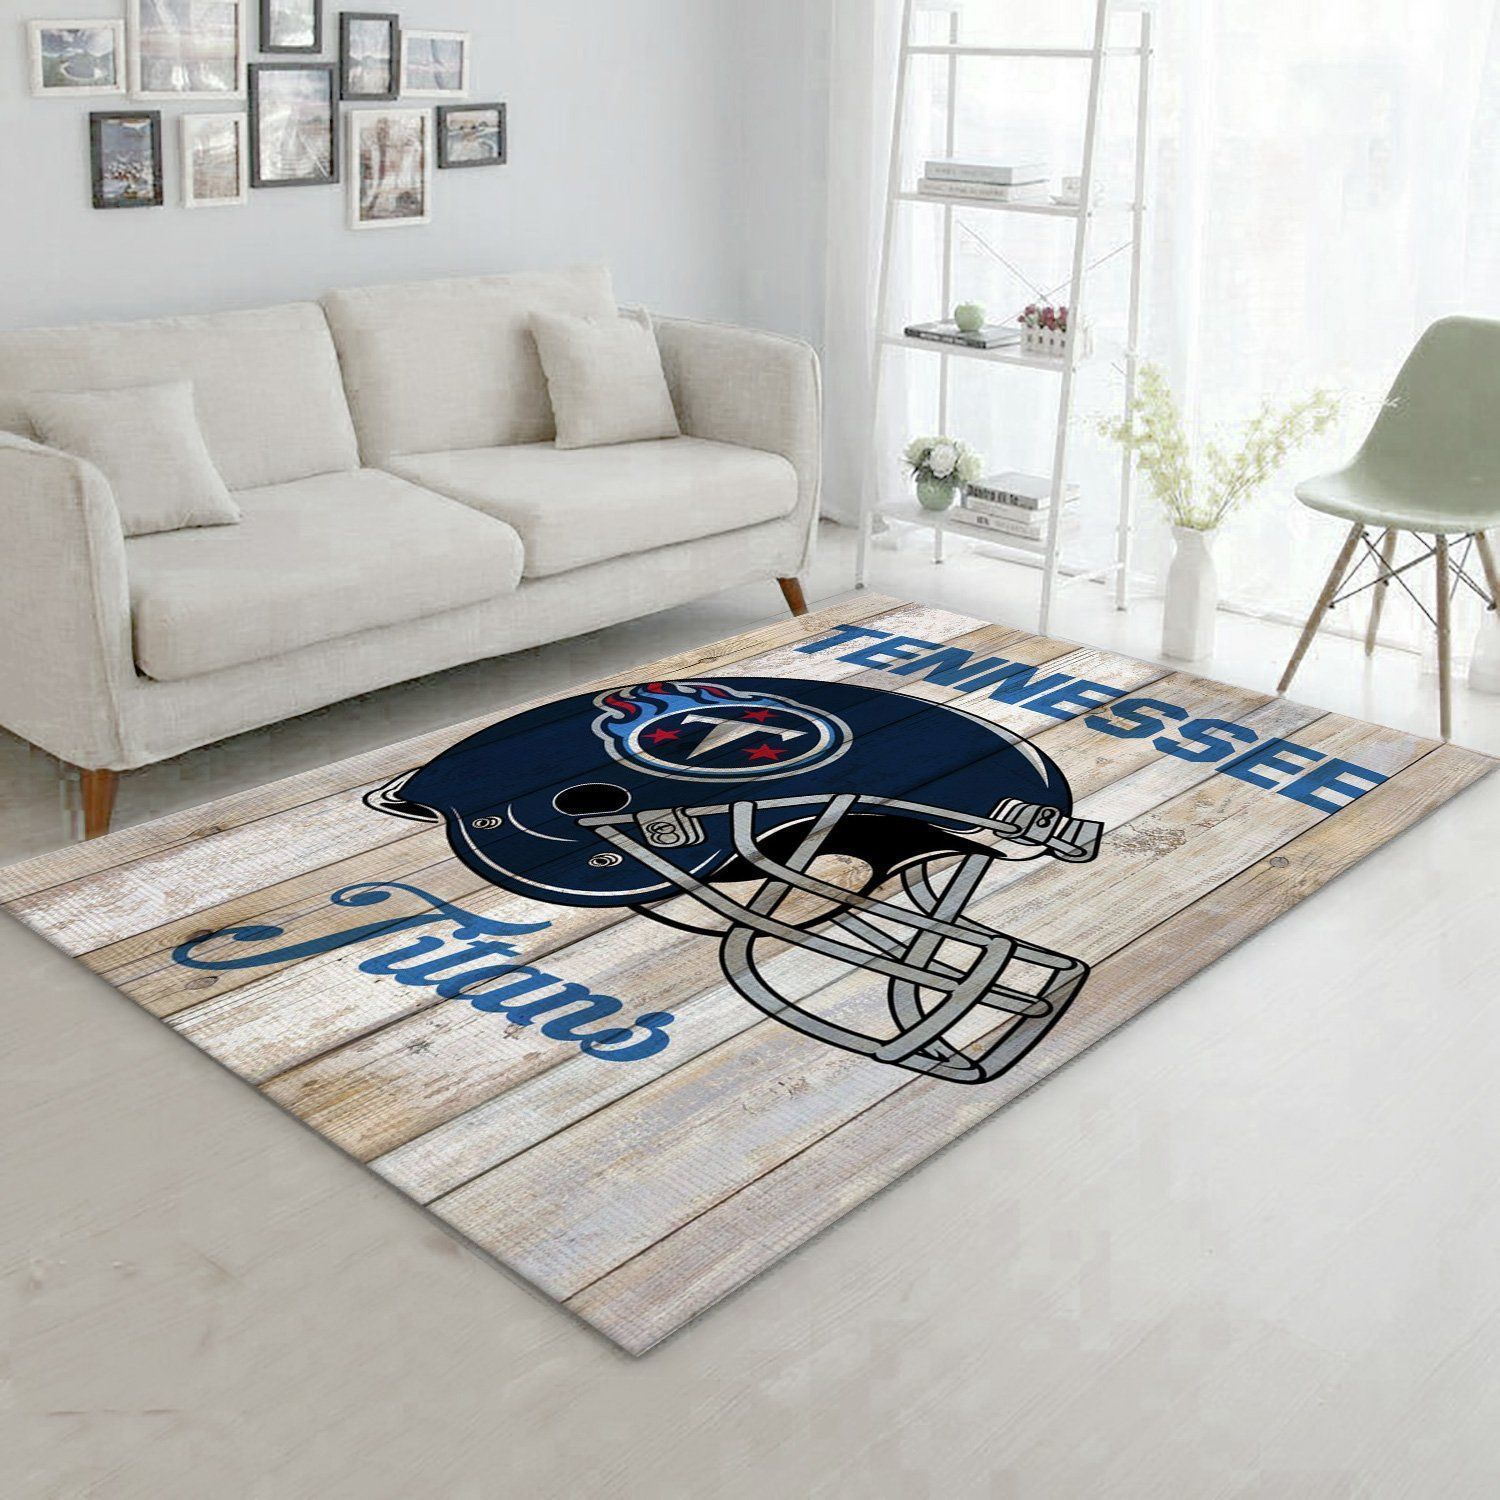 Tennessee Titans Blue Nfl Rug Living Room Rug Home US Decor - Indoor Outdoor Rugs 1